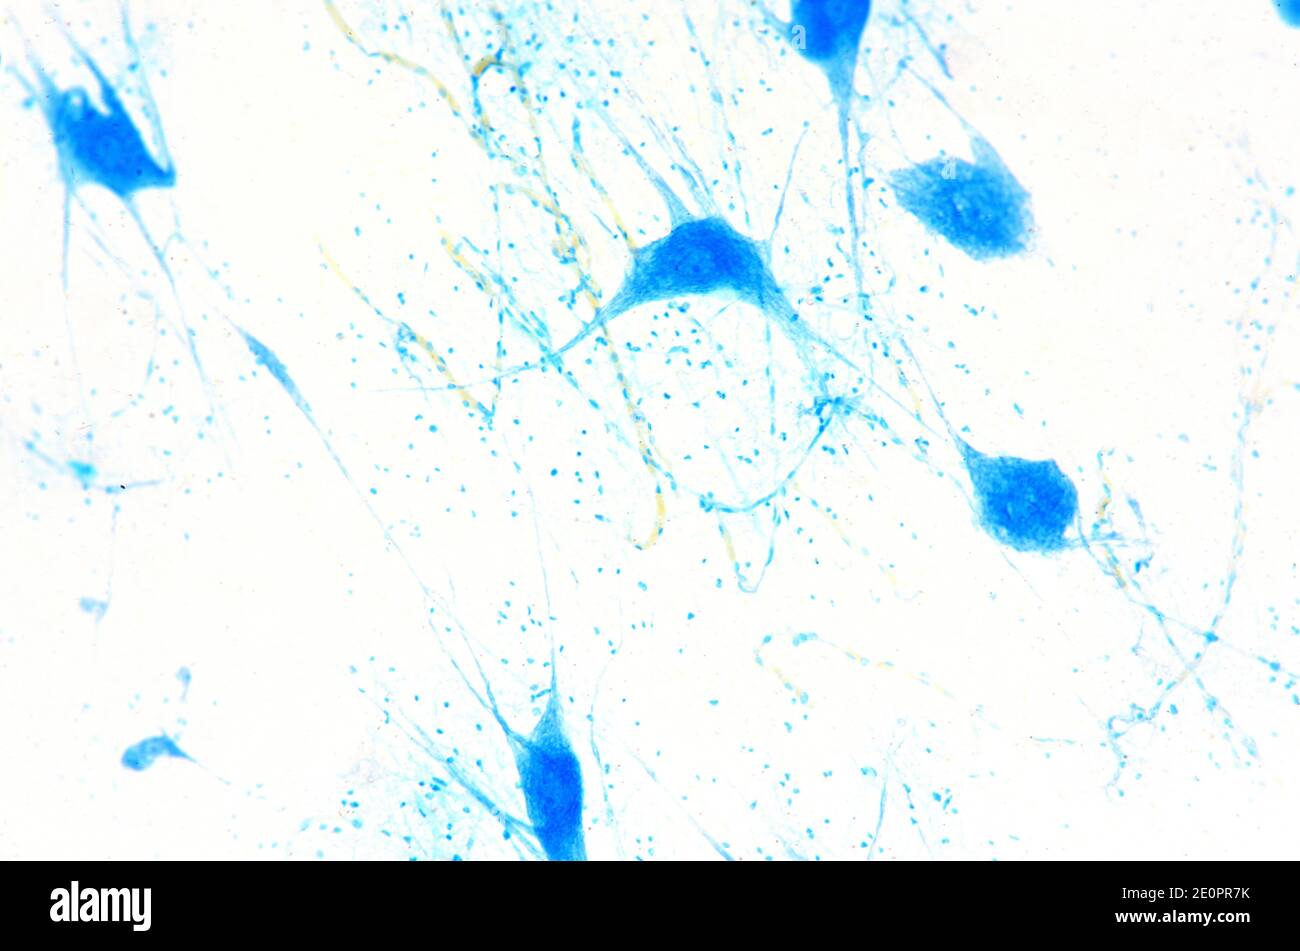 Human motor neurons. X75 at 10 cm wide. Stock Photo